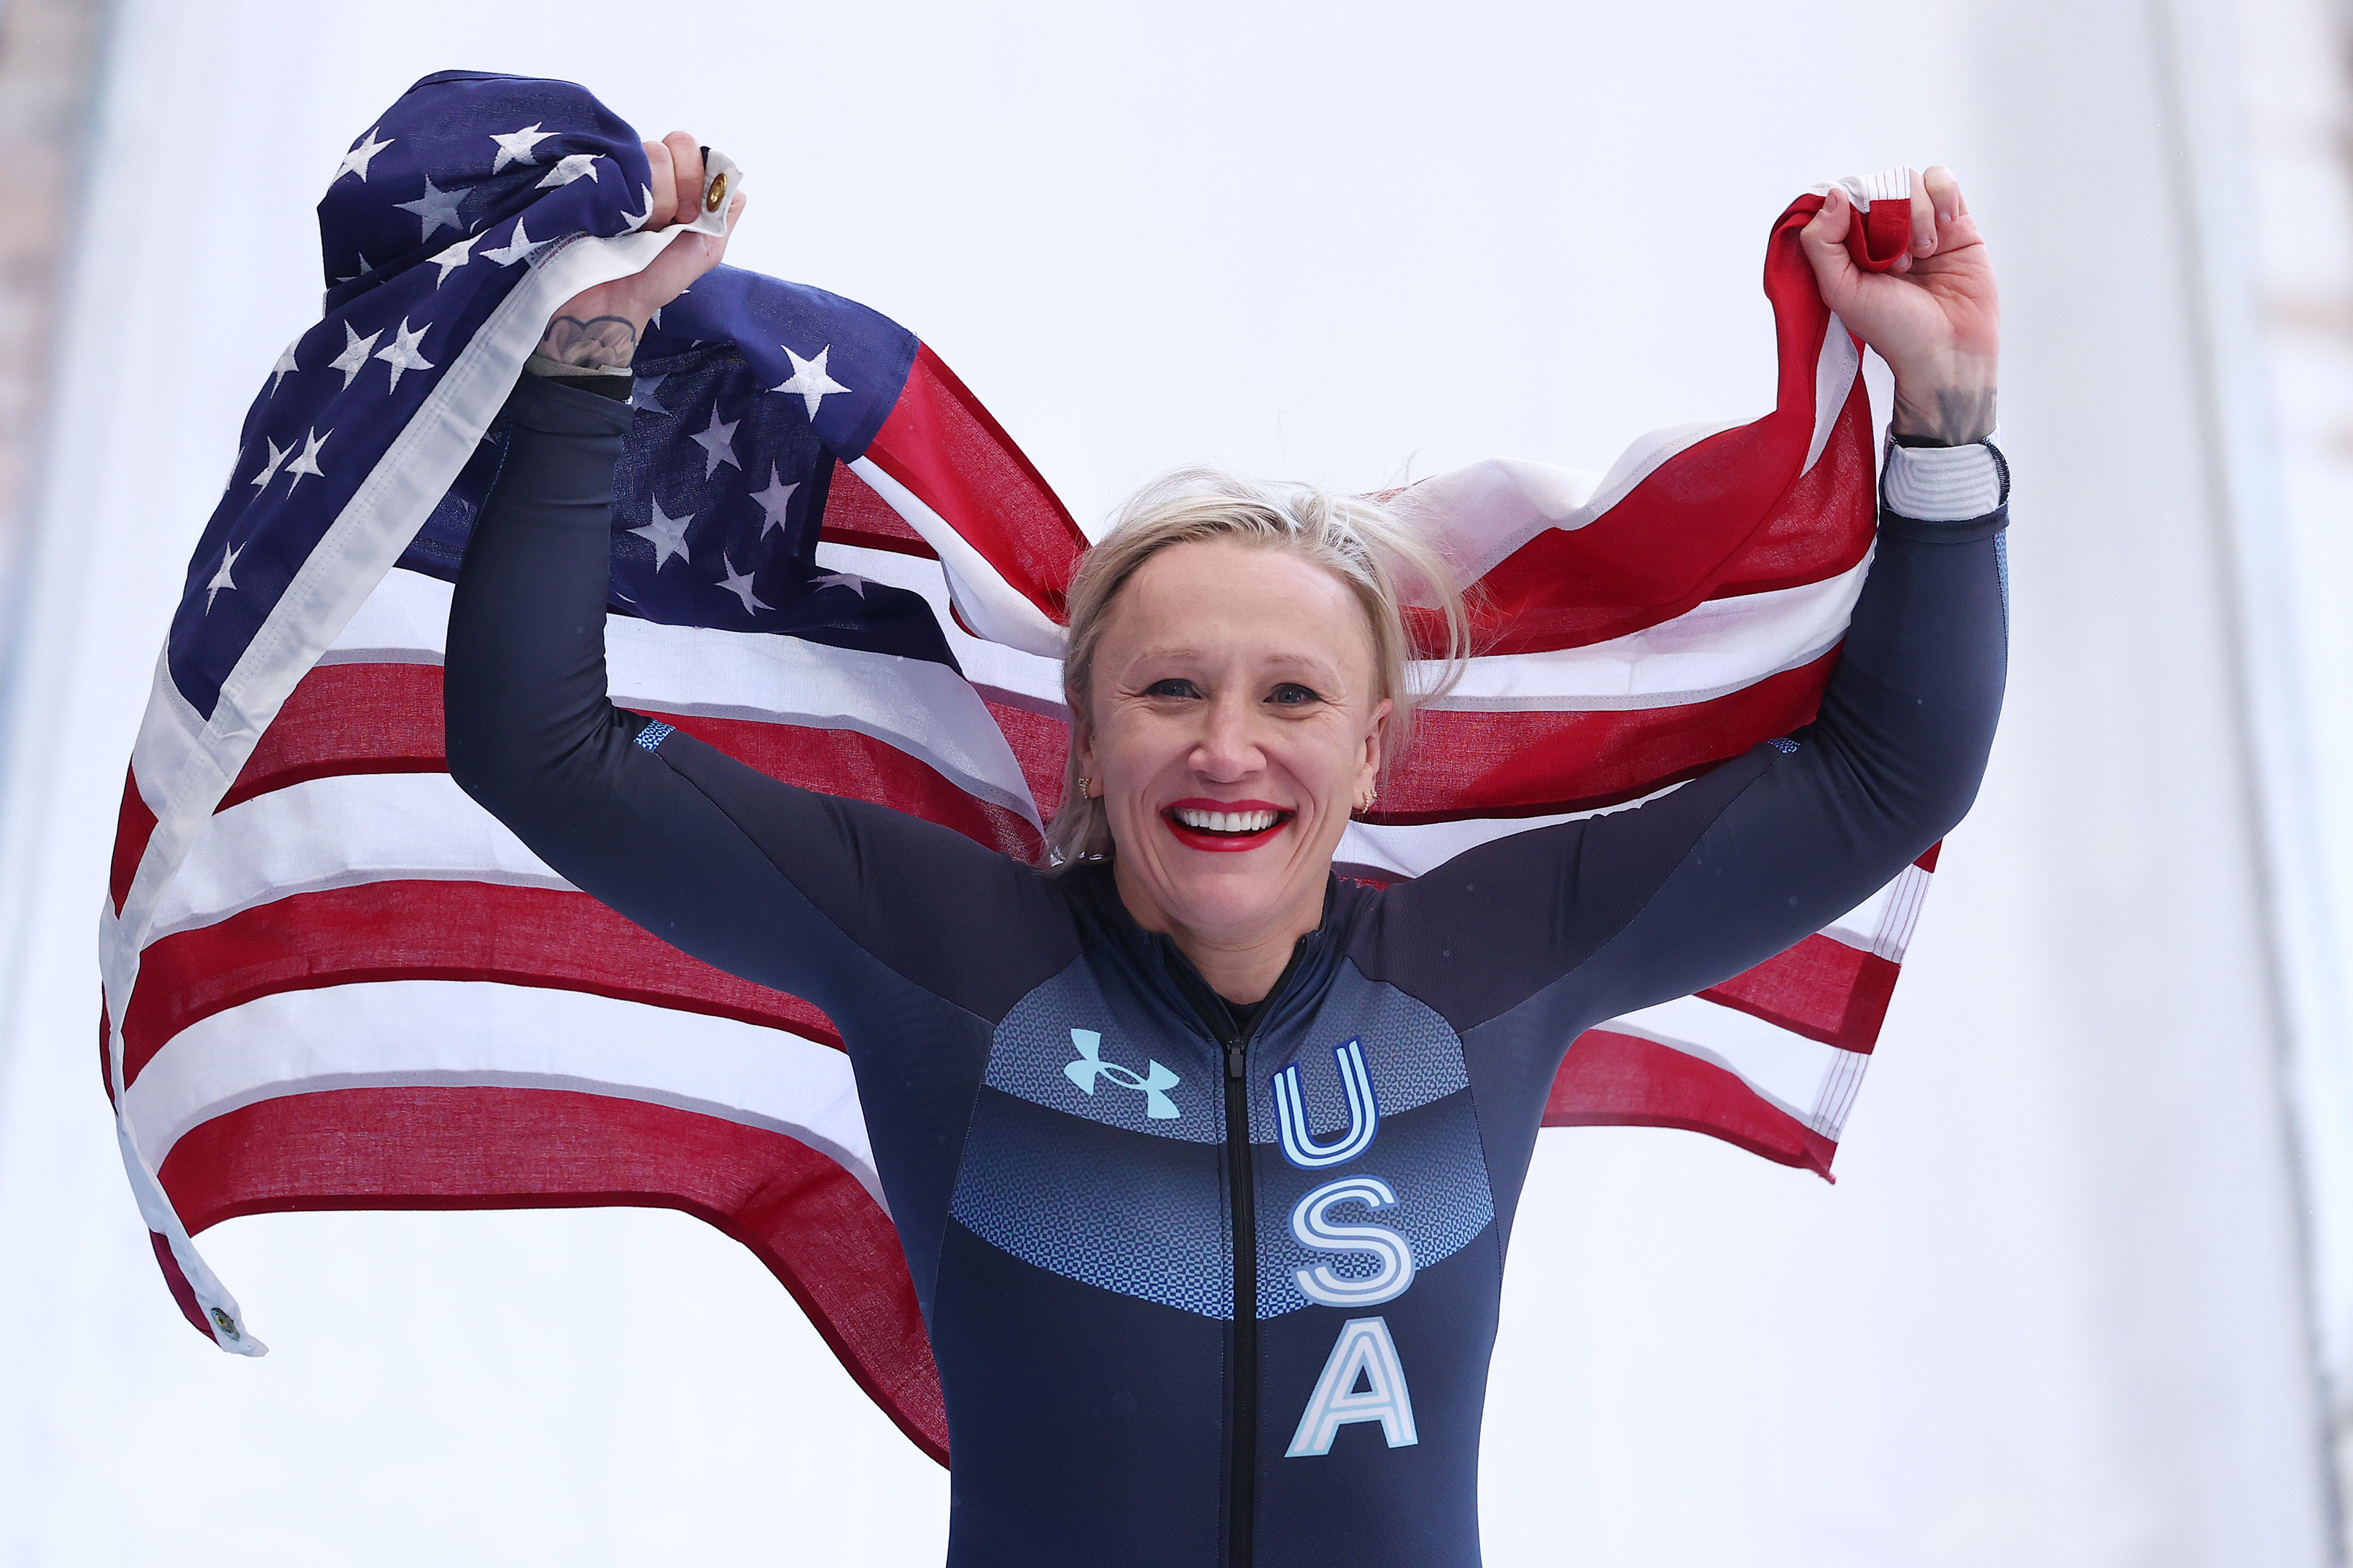 Kaillie Humphries celebrates during the women's monobob bobsleigh event on Monday.